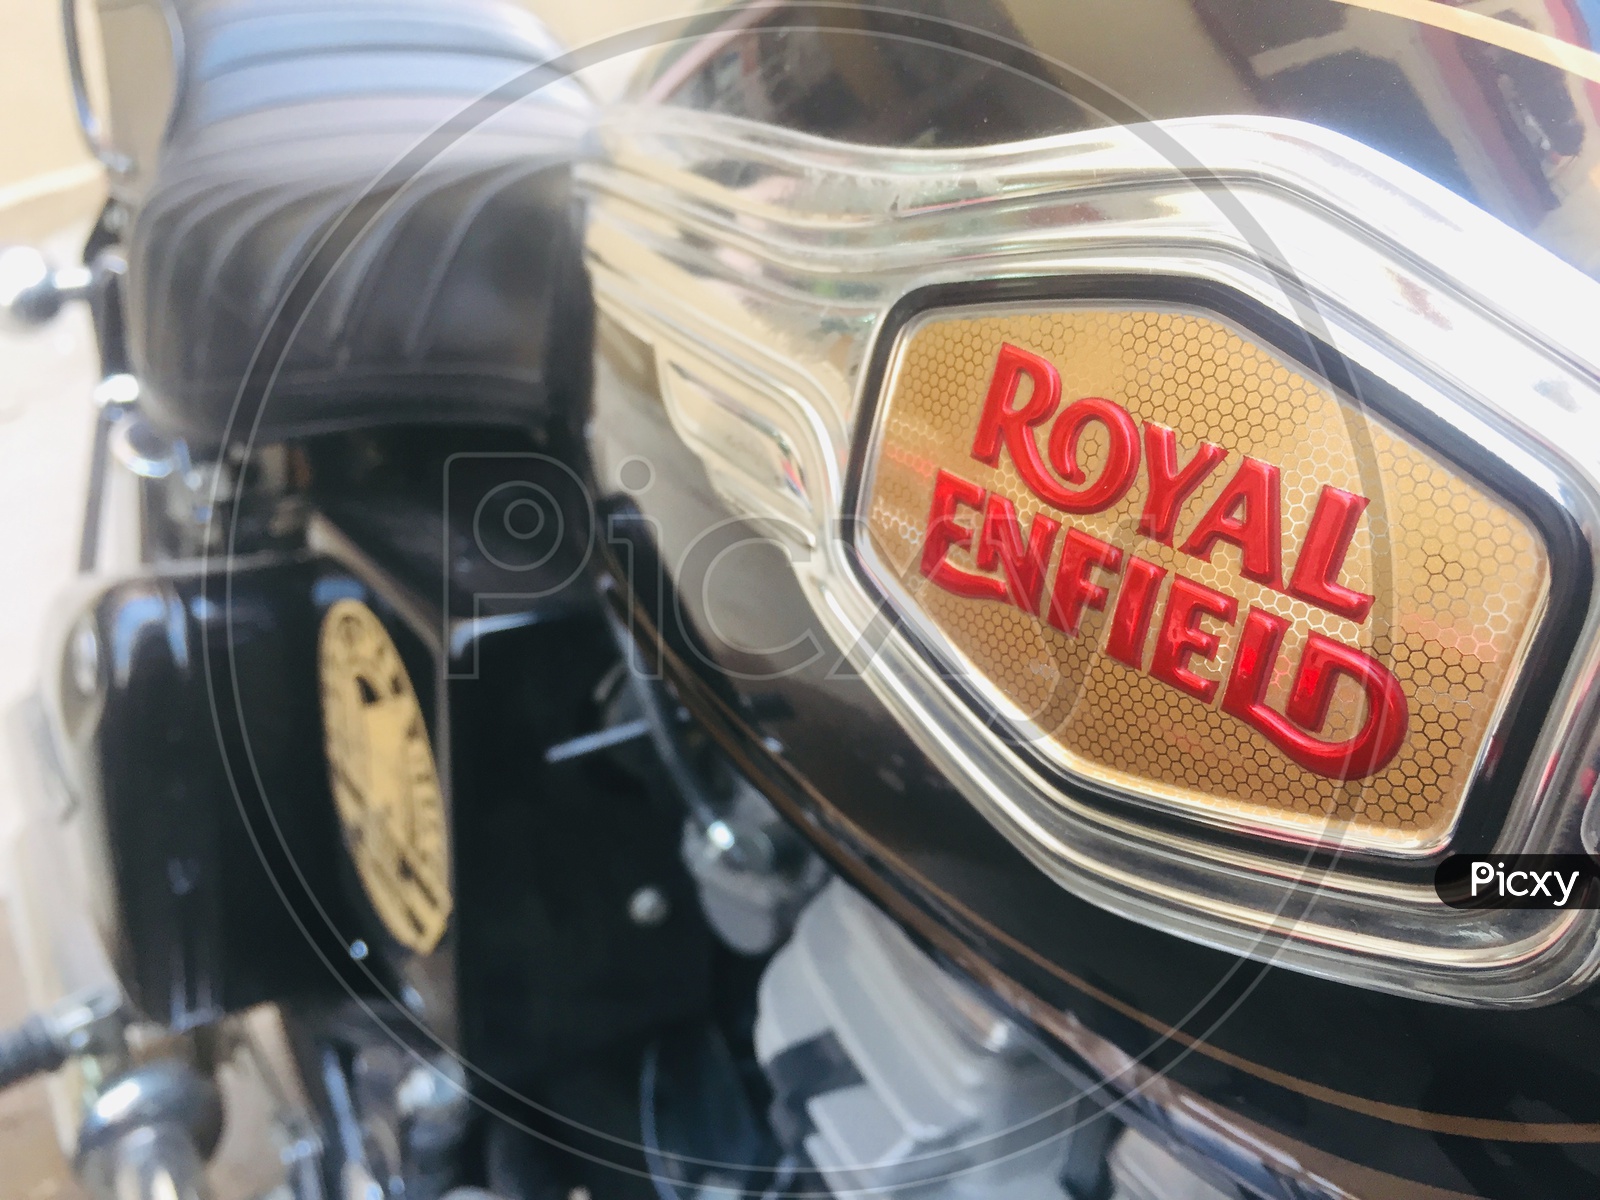 Royal Enfield Super Meteor 650 price announced, starts from ₹3.48 lakh —  check all details here | Business Insider India